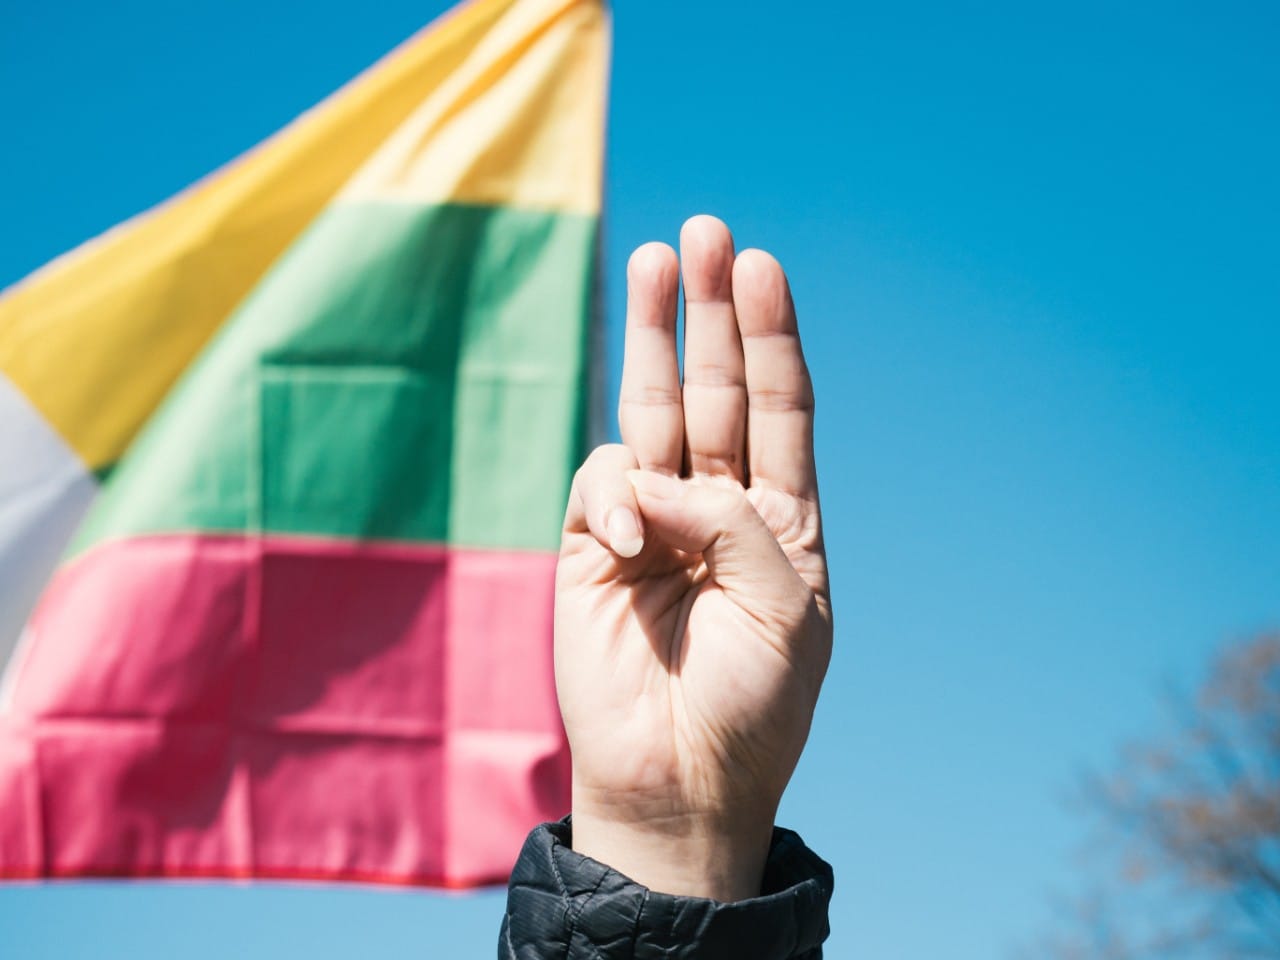 Photograph of three-finger salute in front of Myanmar flag